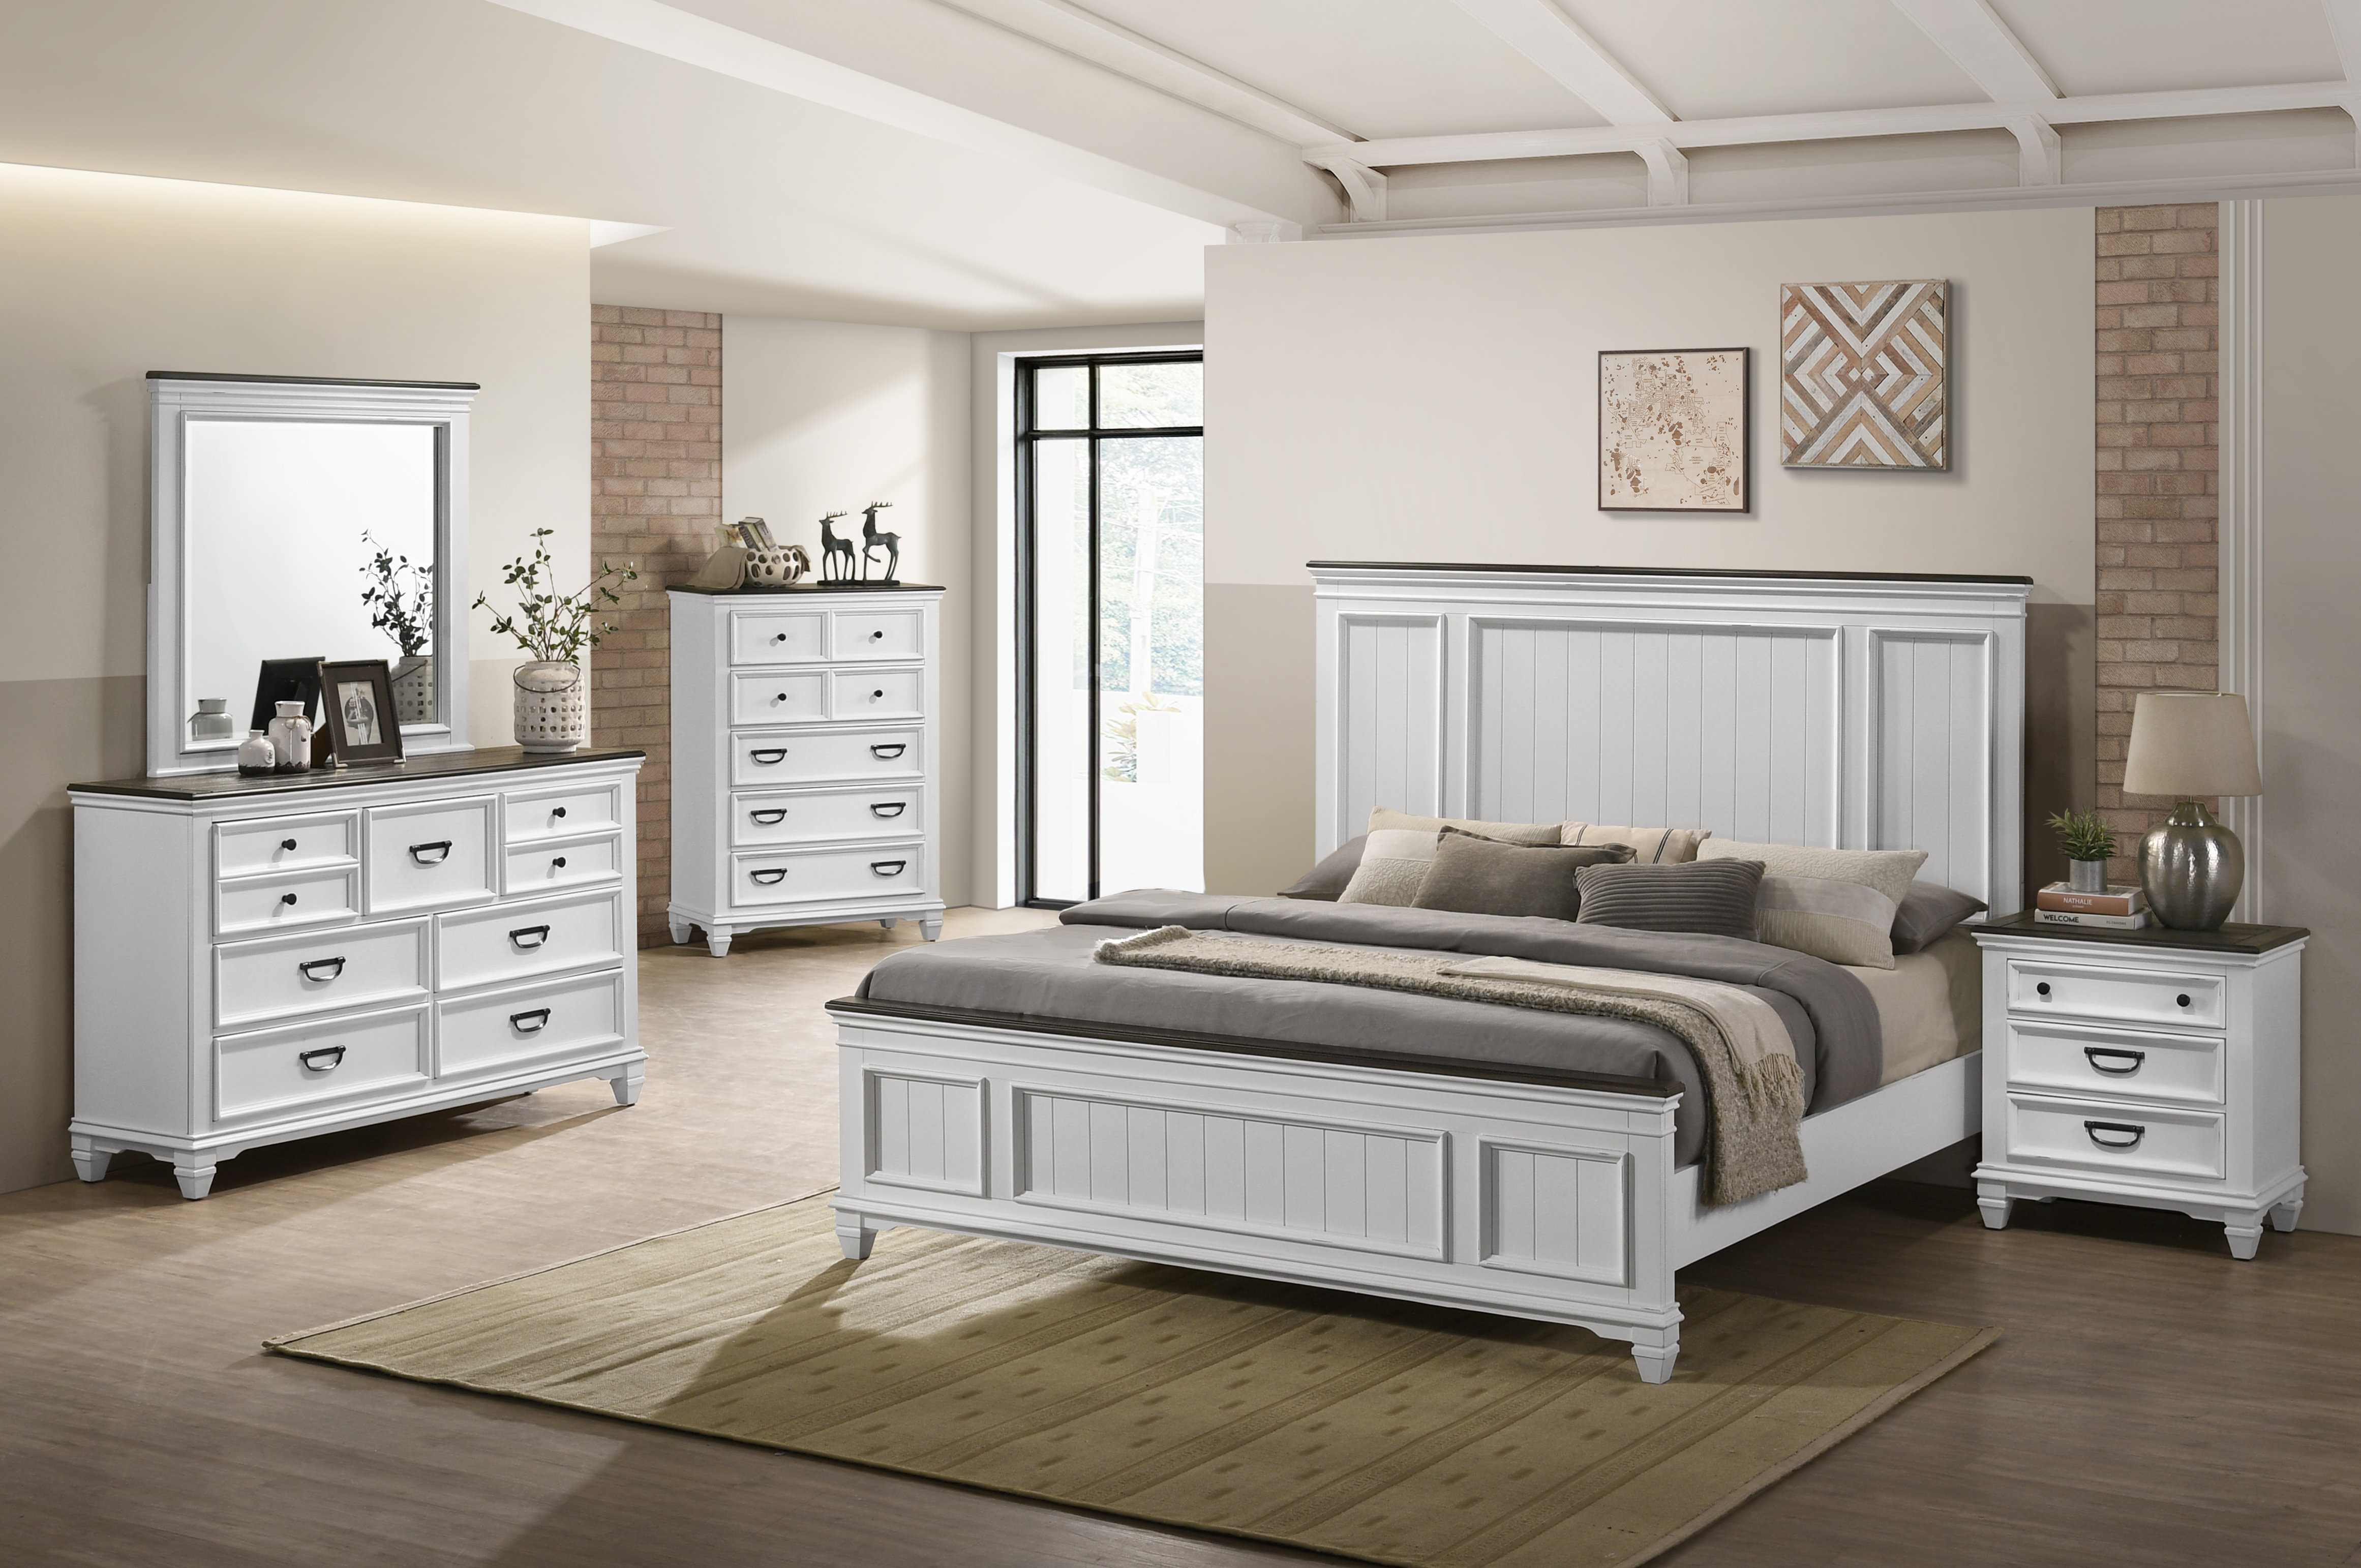 Laurel Foundry Modern Farmhouse Withyditch Wood Bedroom Set With ...